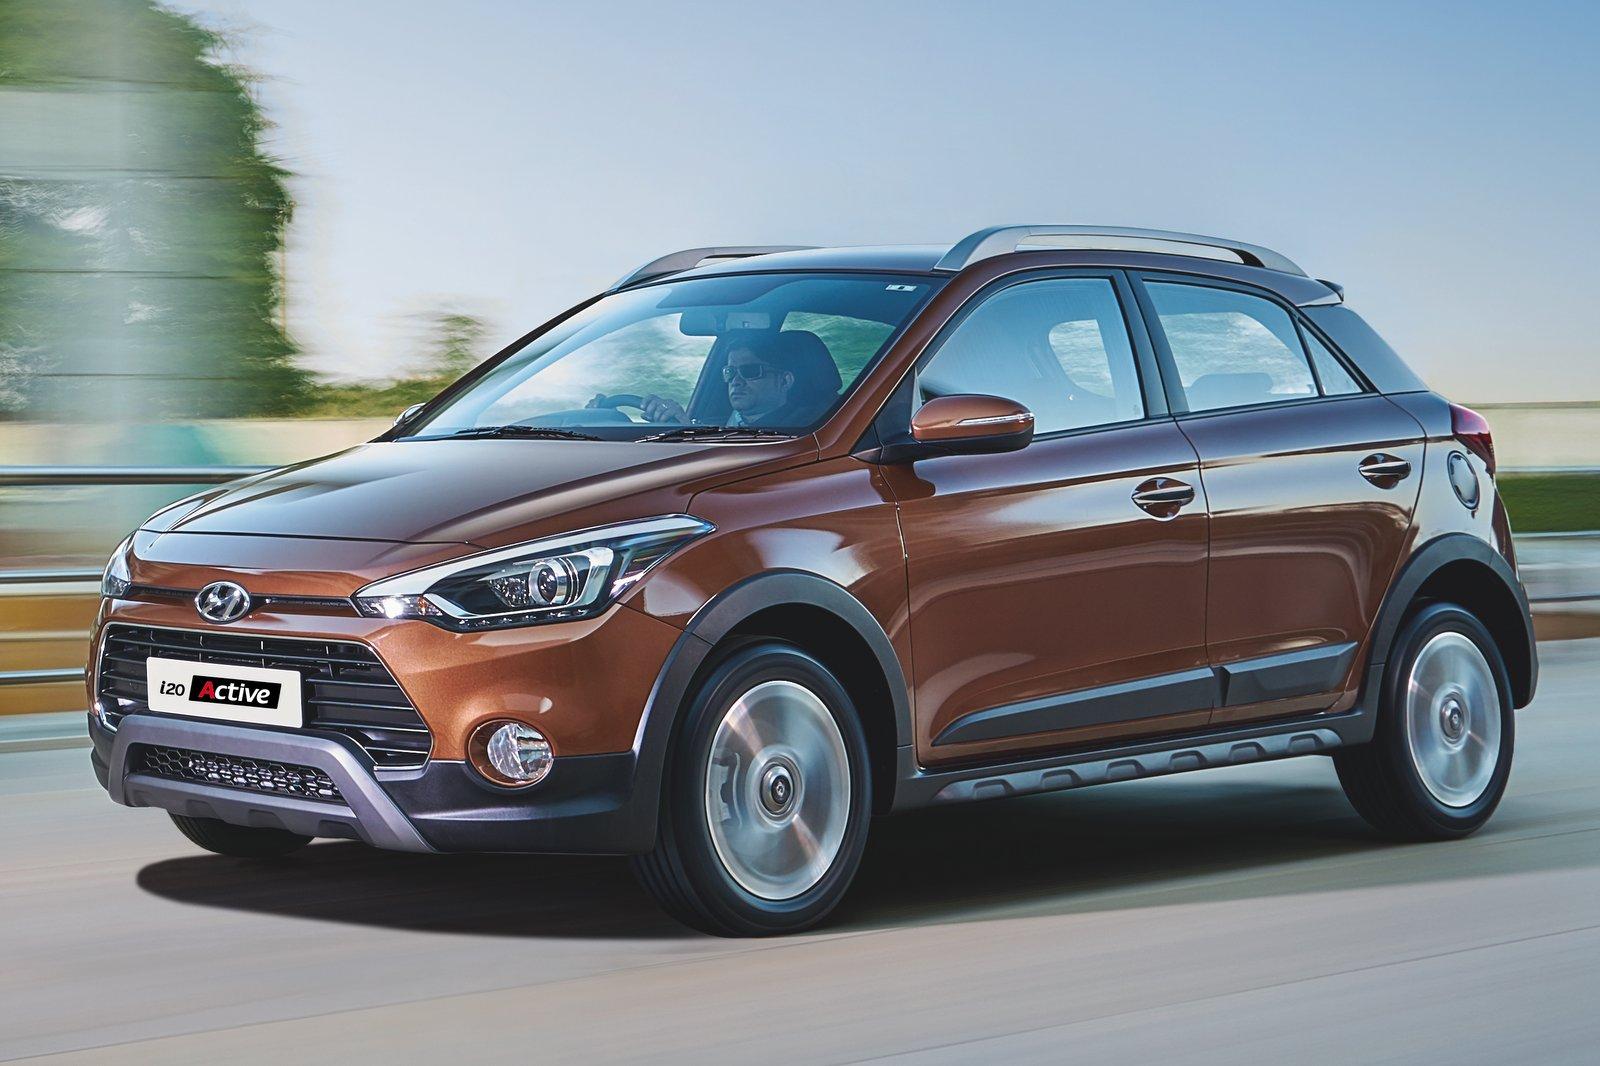 The Hyundai i20 Active Is India's Answer to the Sandero Stepway ...